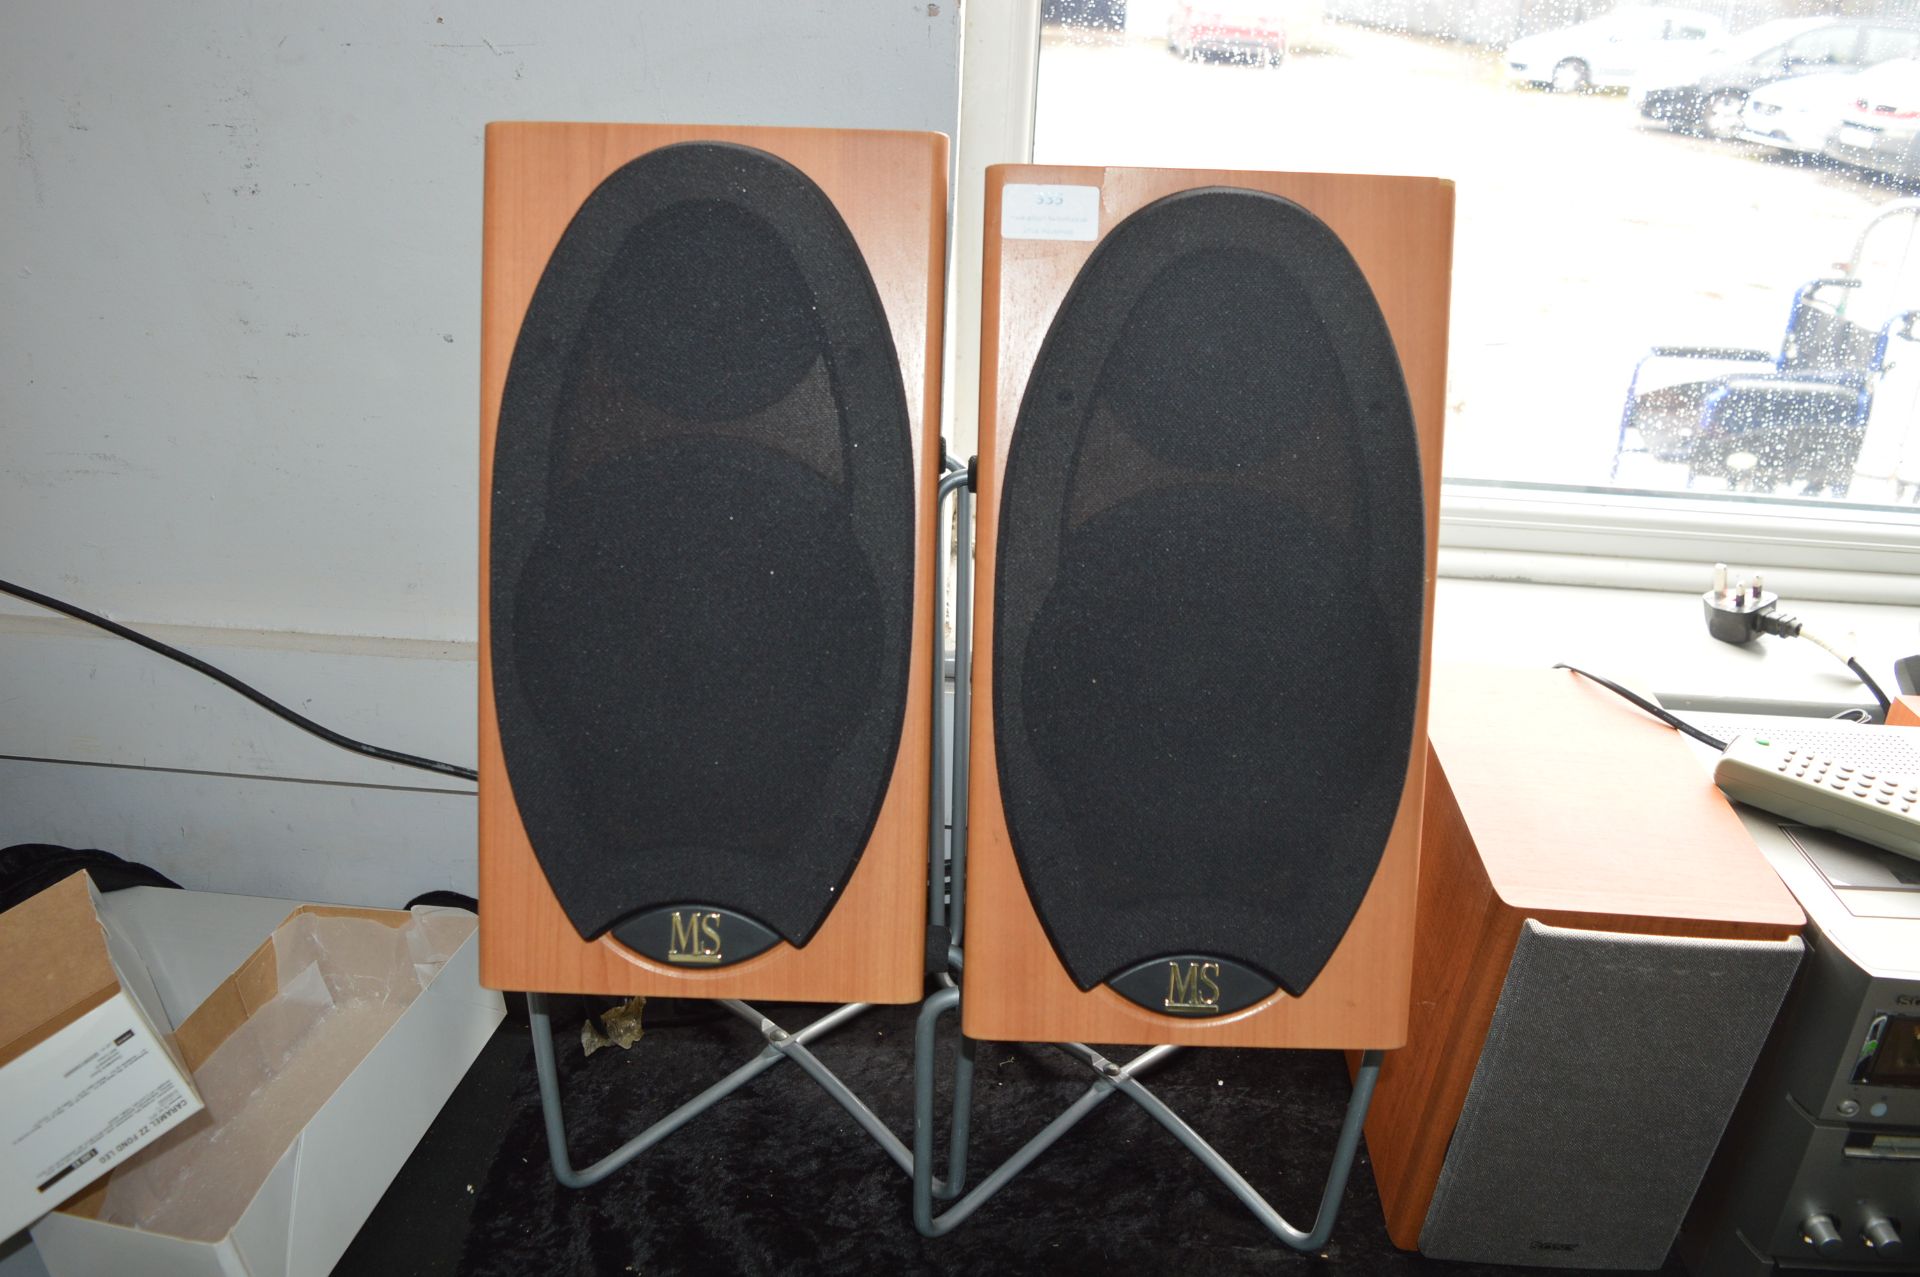 Pair of MS Audio Speakers on Stands